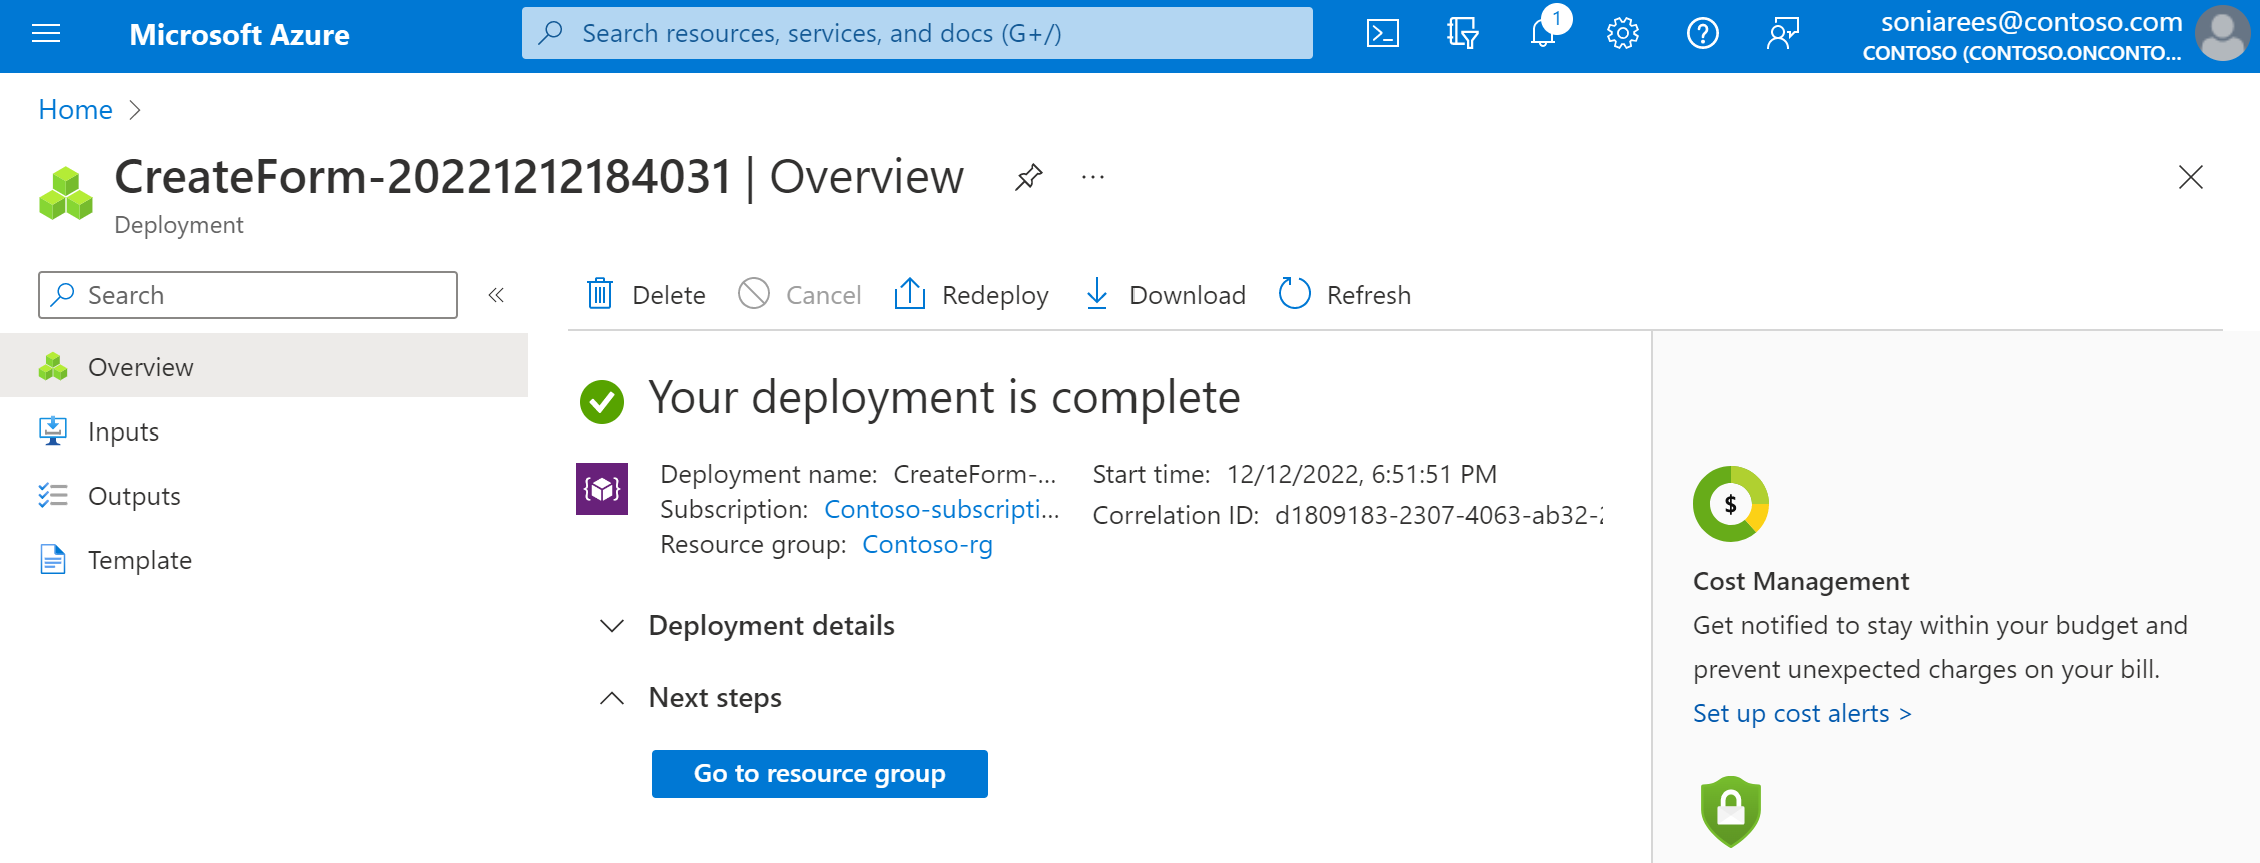 Screenshot of the Create an Azure Communications Gateway portal, showing a completed deployment screen.